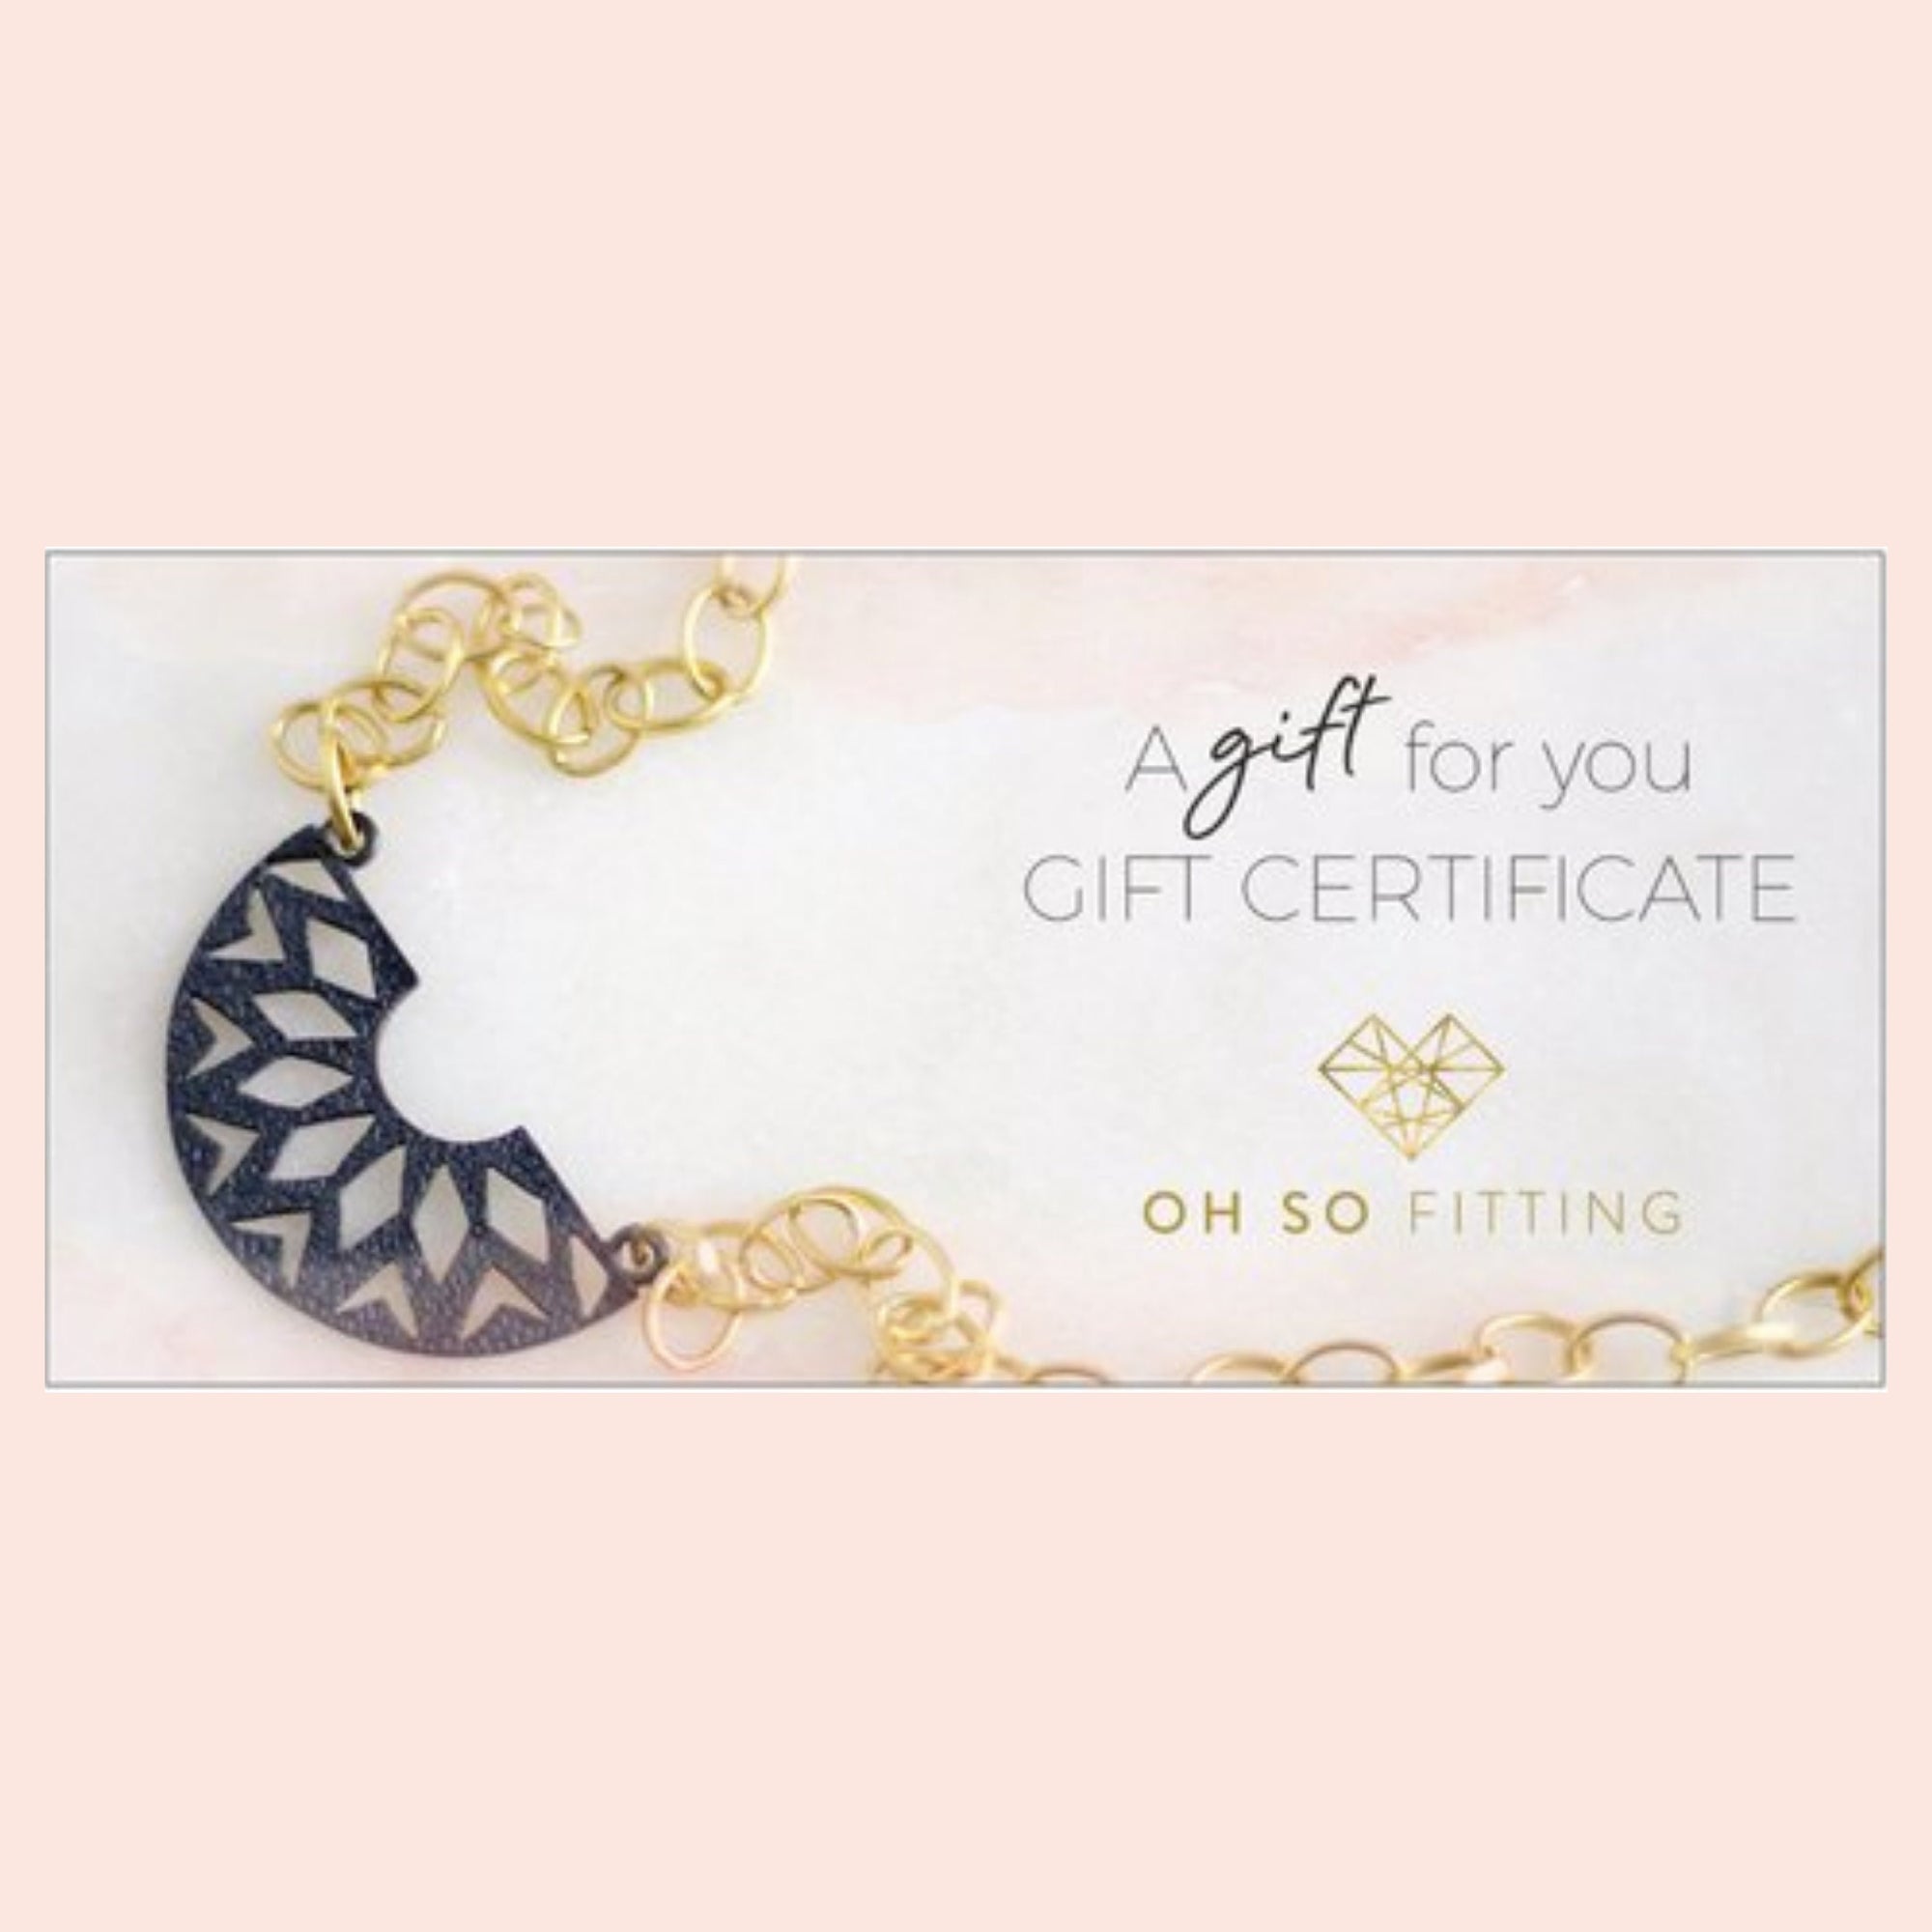 Gift Certificate for 20 Dollars to Spend at Oh